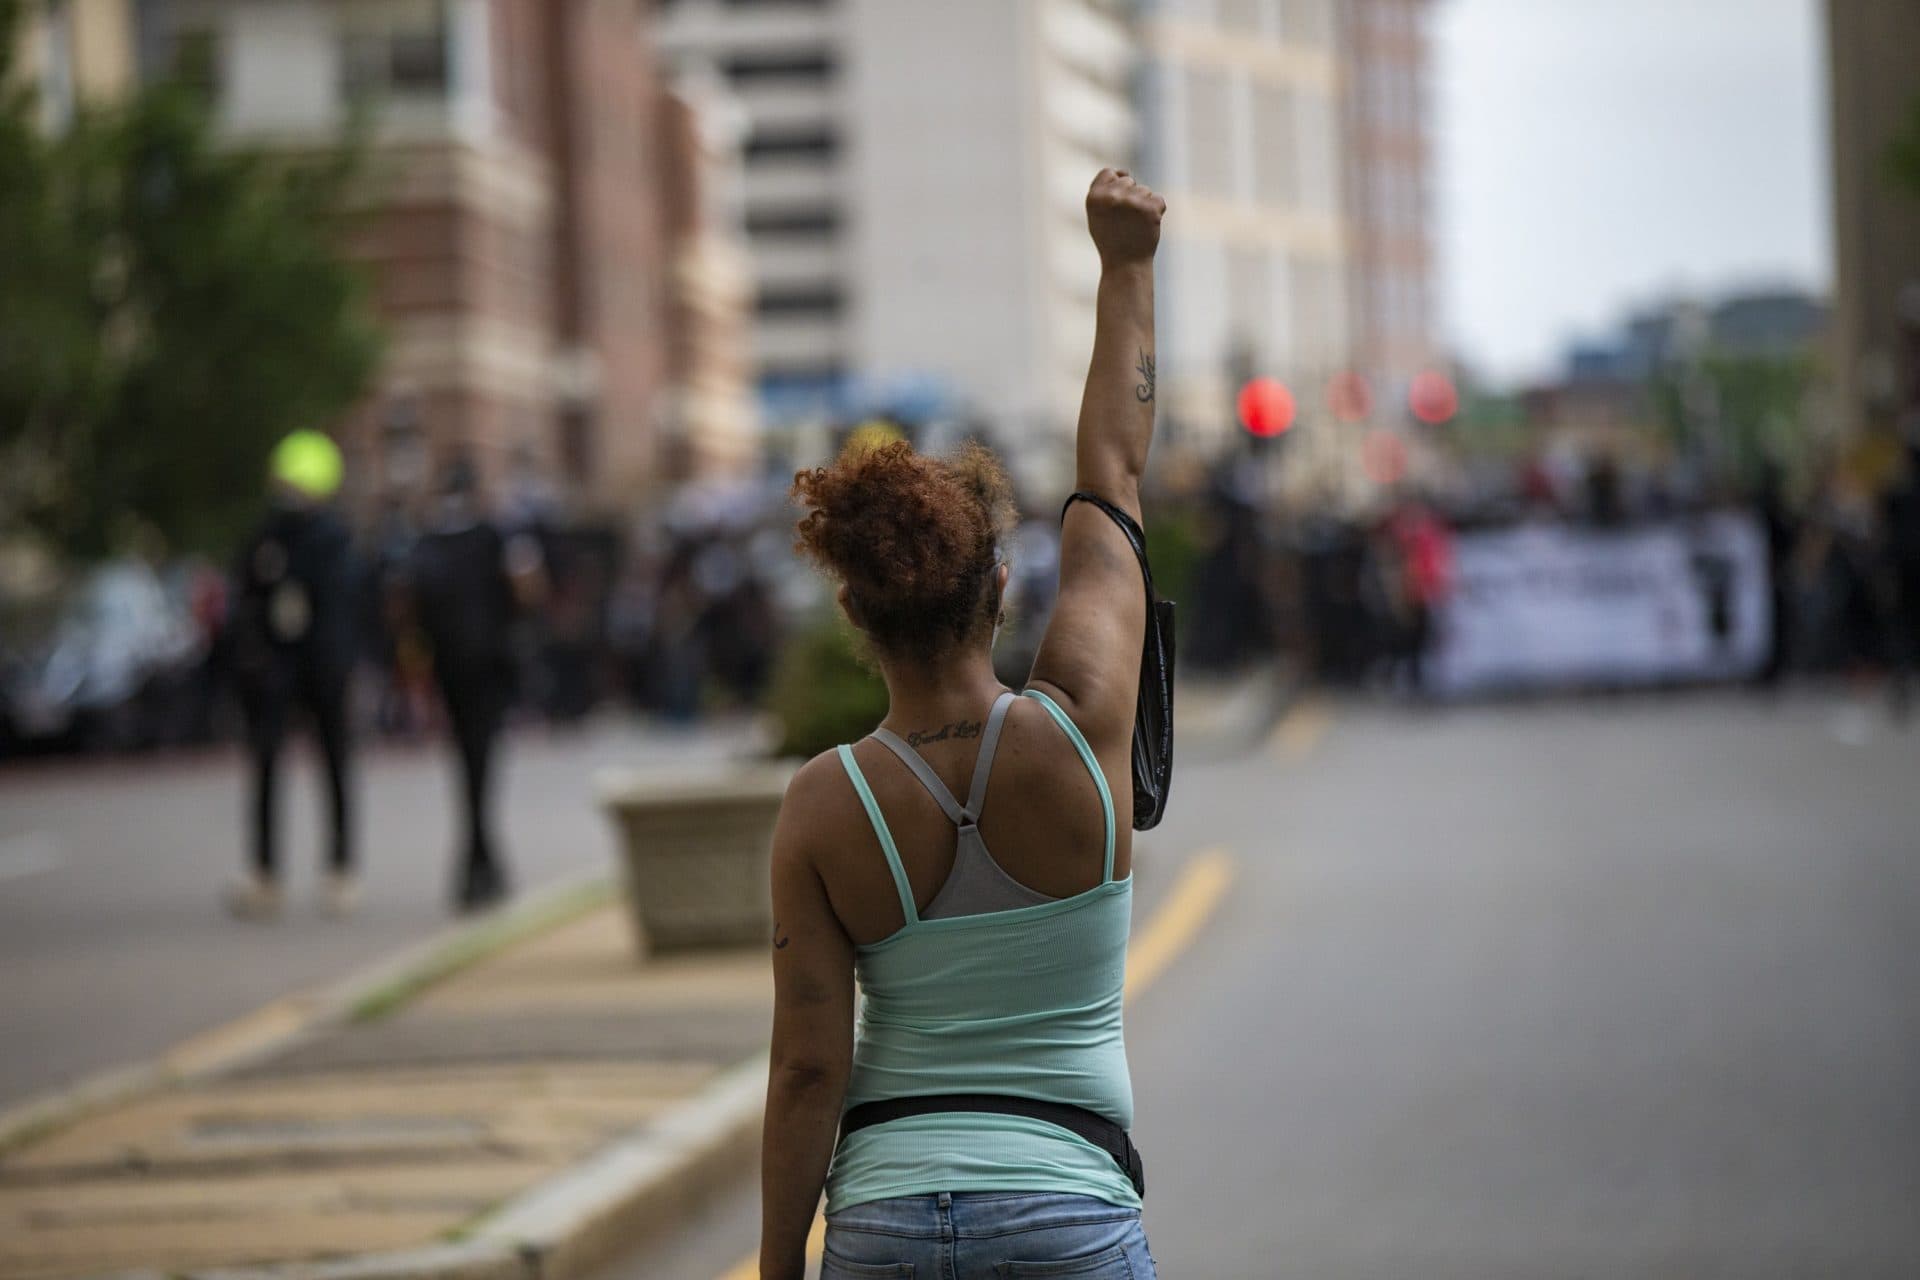 A woman raises her fist in the middle of the street by Tufts Medical Center as hundrreds of protesters march up Washington Street en route to Boston City Hall during the F.T.P. March to Defund Police and Fund Our Communities. (Jesse Costa/WBUR)